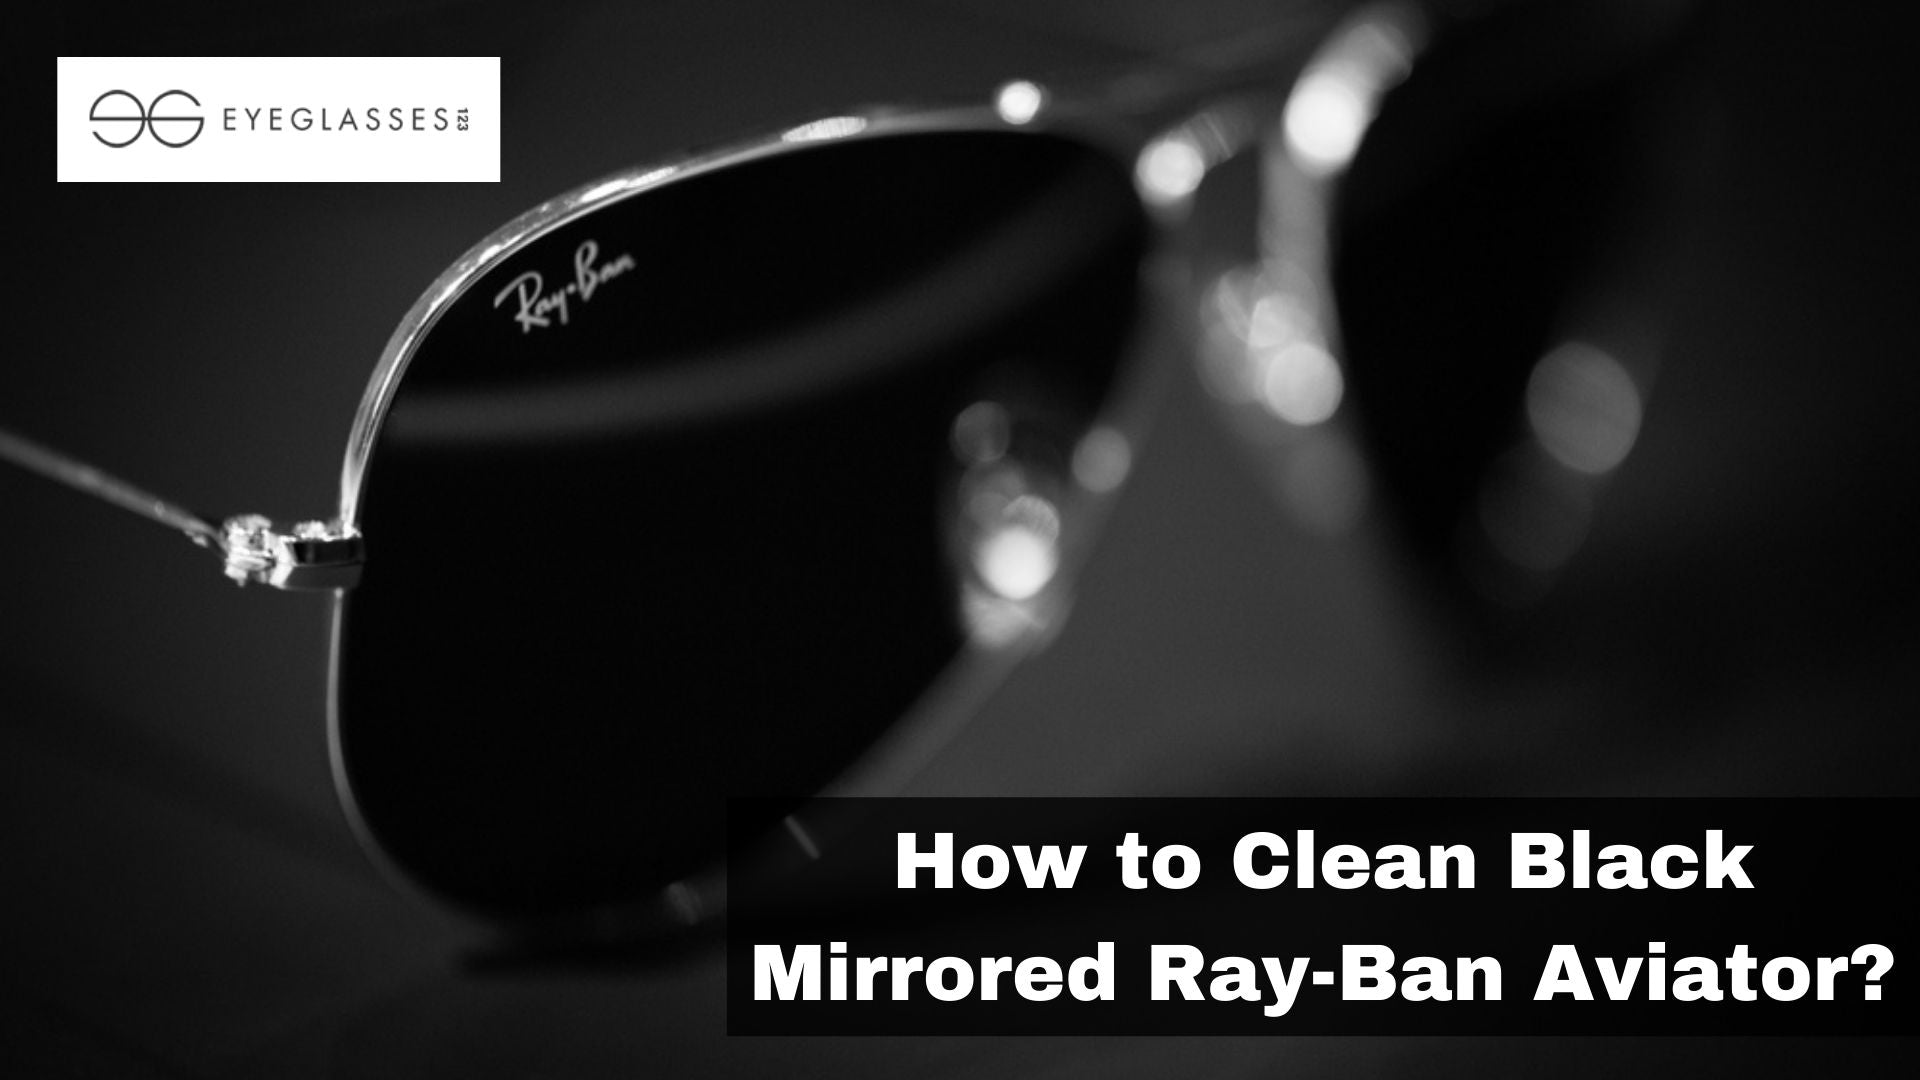 How to Clean Black Mirrored Ray-Ban Aviator?